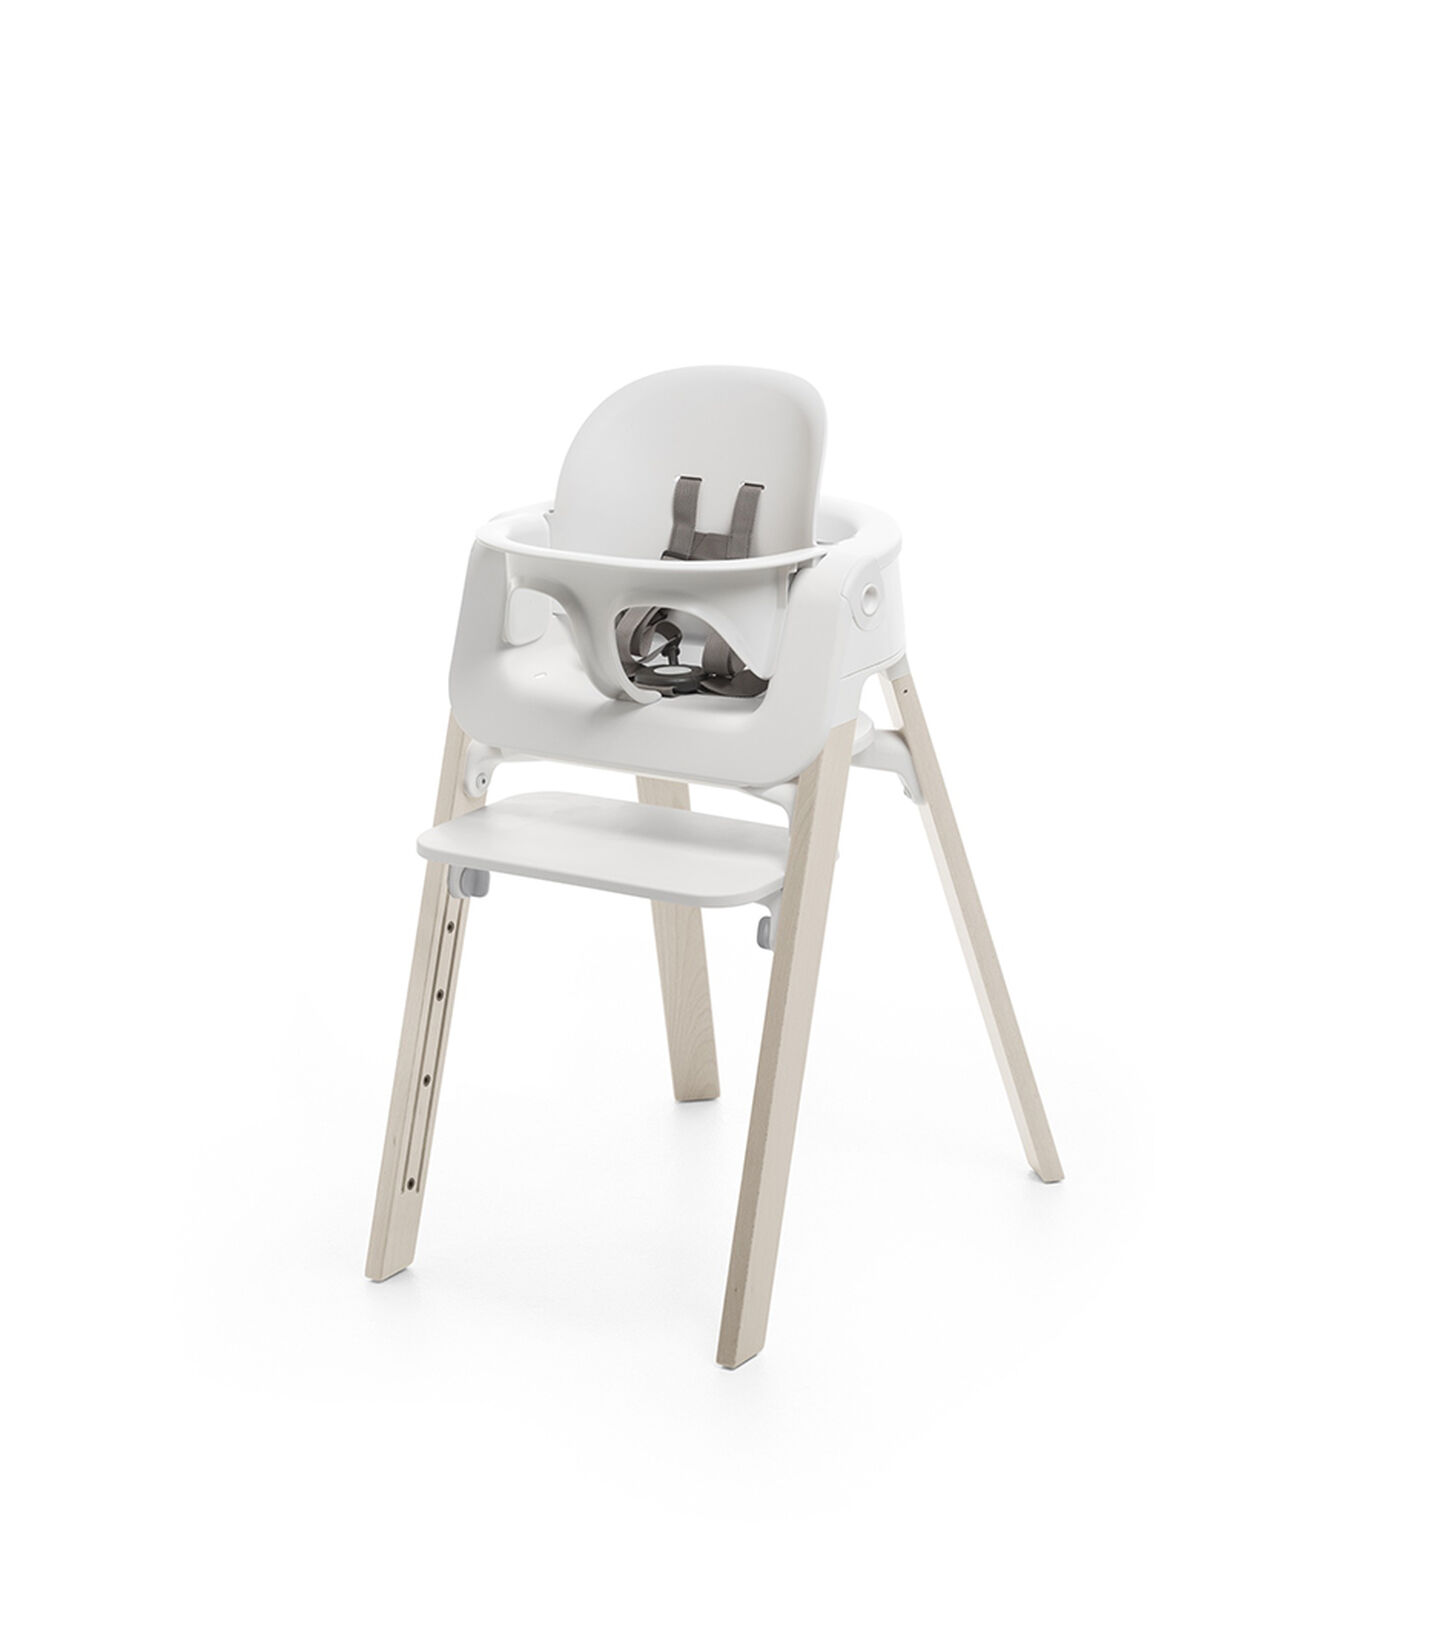 Accessories. Baby Set. Mounted on Stokke Steps highchair. view 3